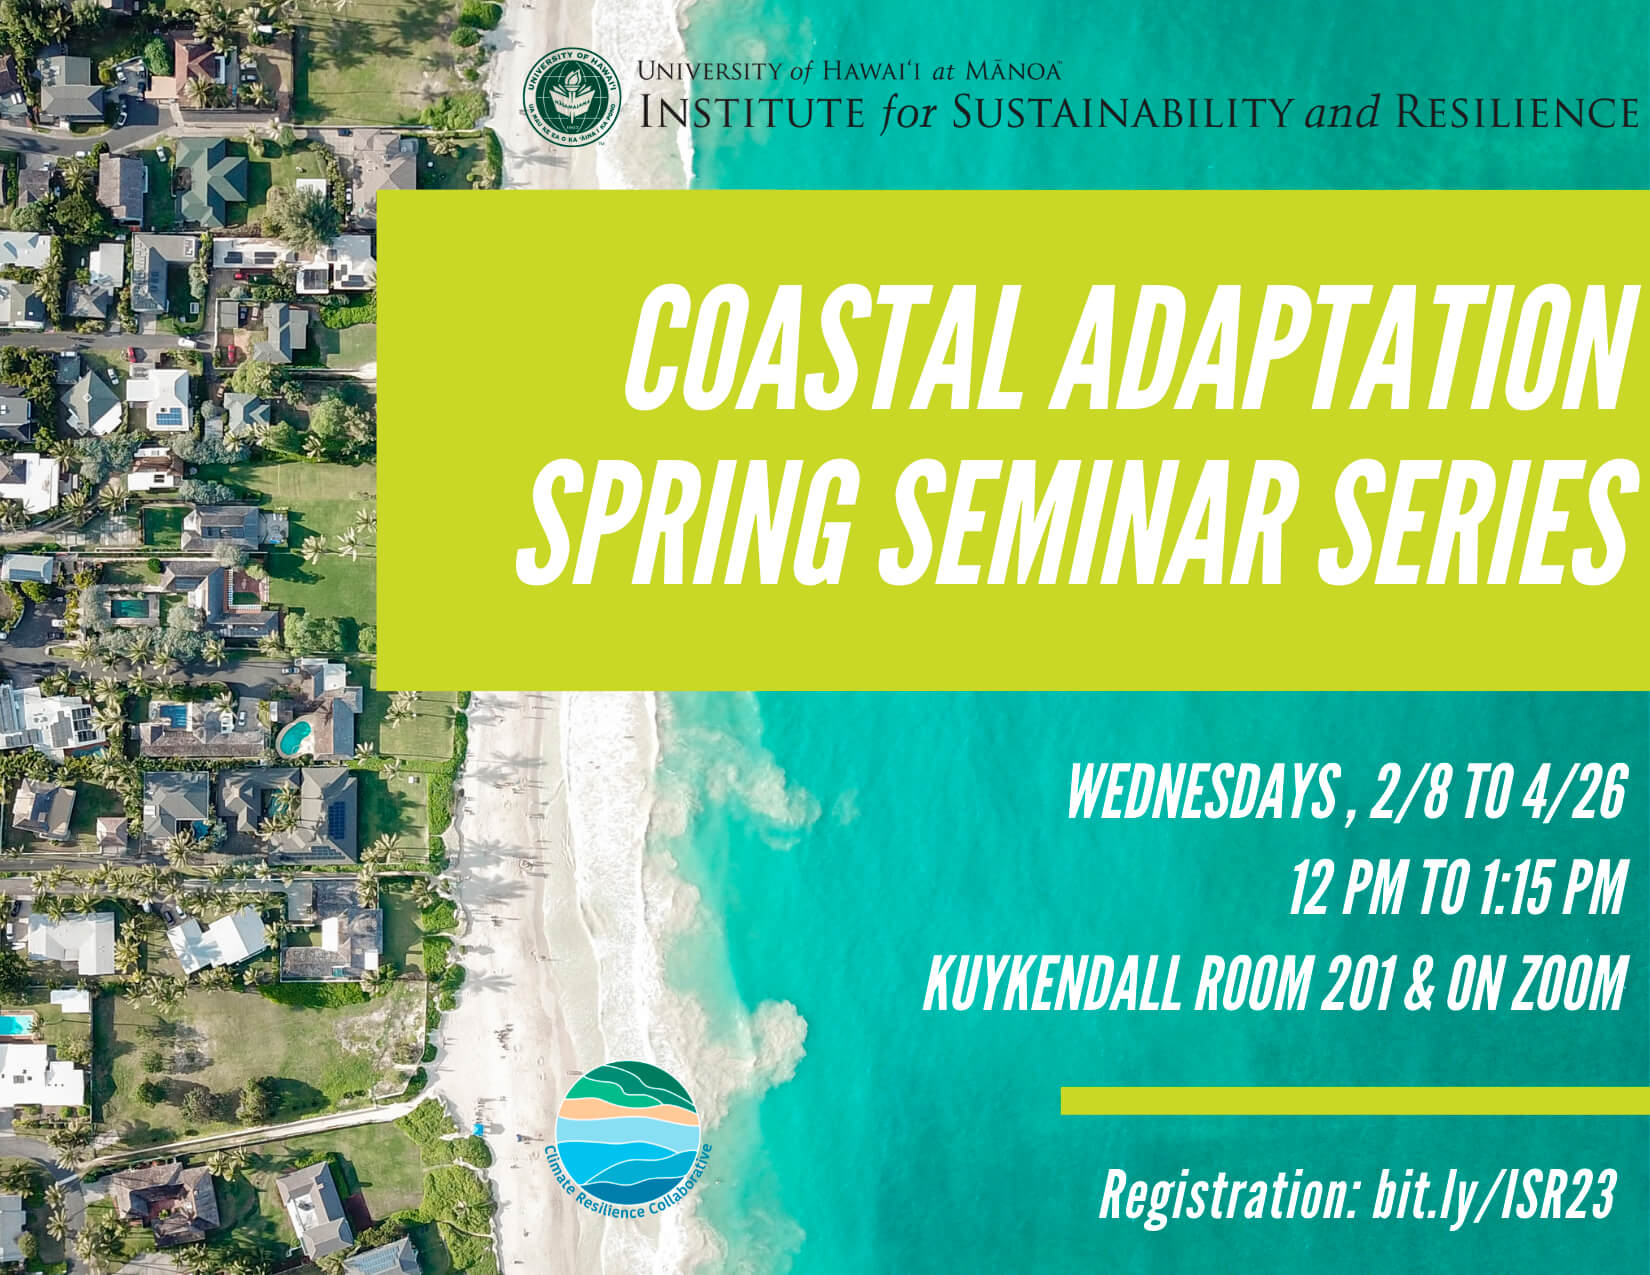 ISR Coastal Adaptation Spring 2023 Seminar Series: Wednesdays, February 8 – April 26 from 12:00 pm – 1:15 pm in Kuykendall Room 201 or on Zoom. Register at bit.ly/3Julbri